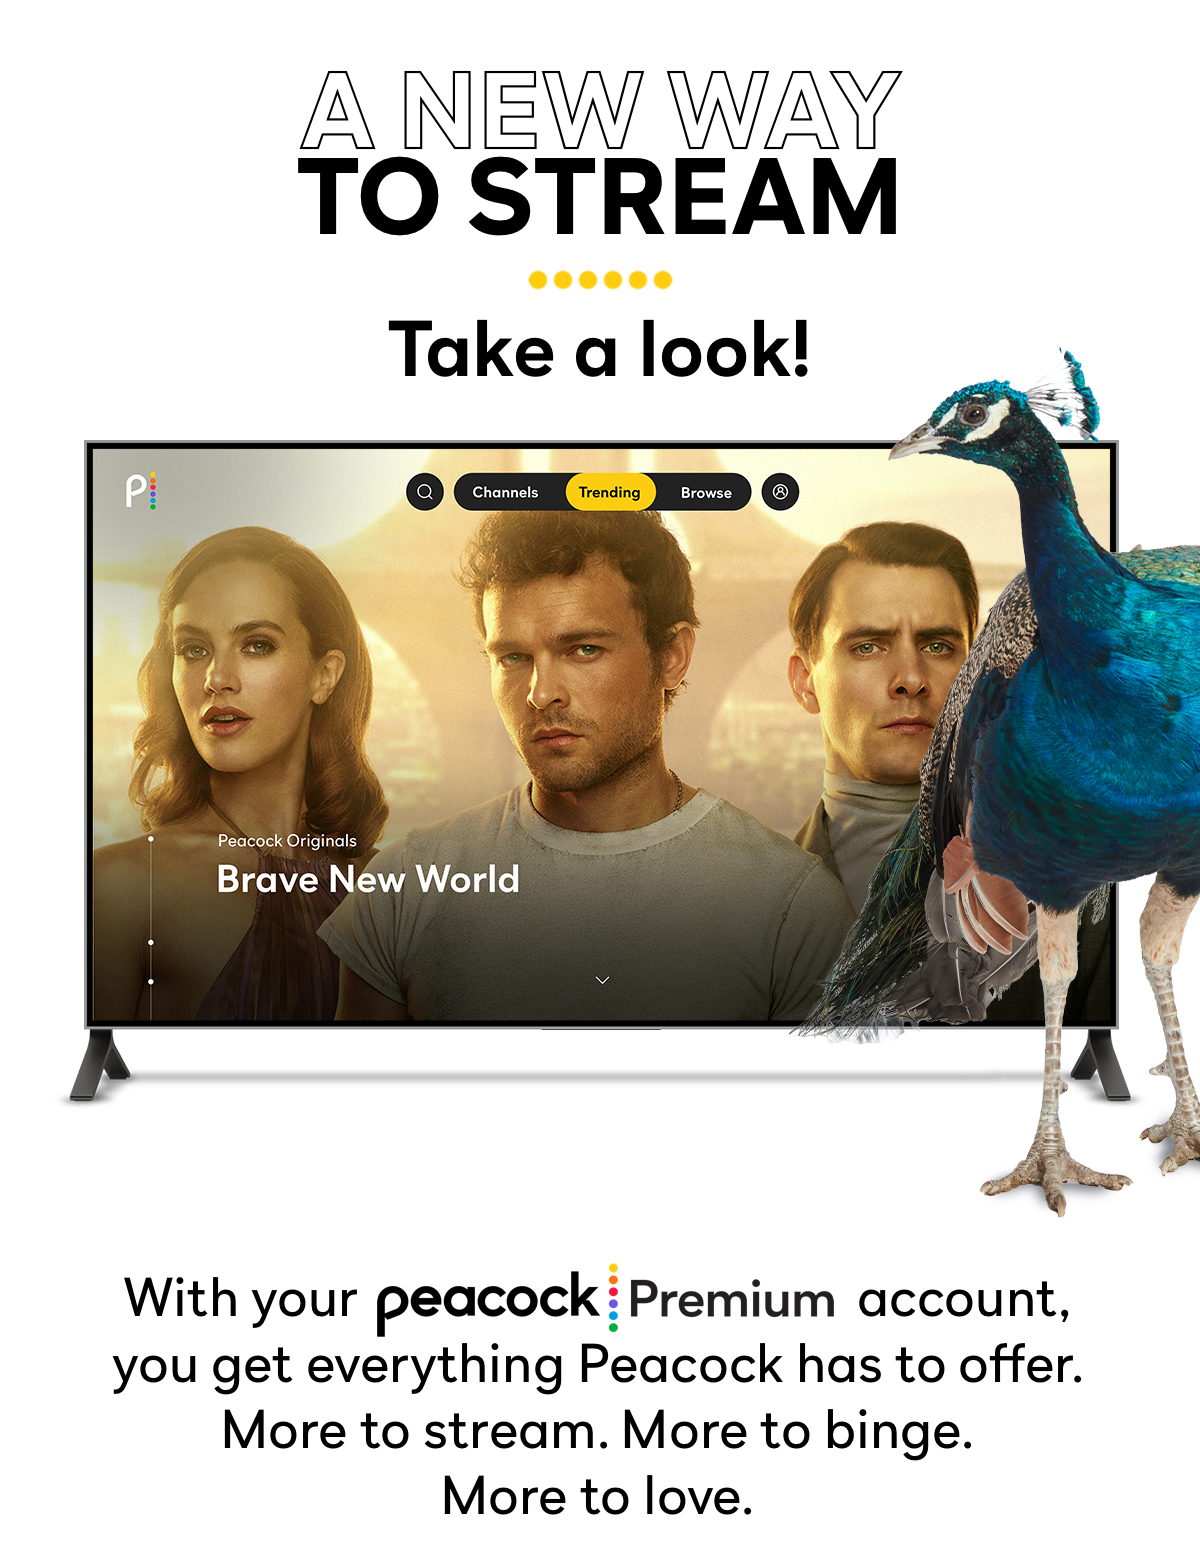 A New Way To Stream | Take a Look! | Brave New World | With your Peacock Premium account, you get everything Peacock has to offer. More to stream. More to binge. More to love.